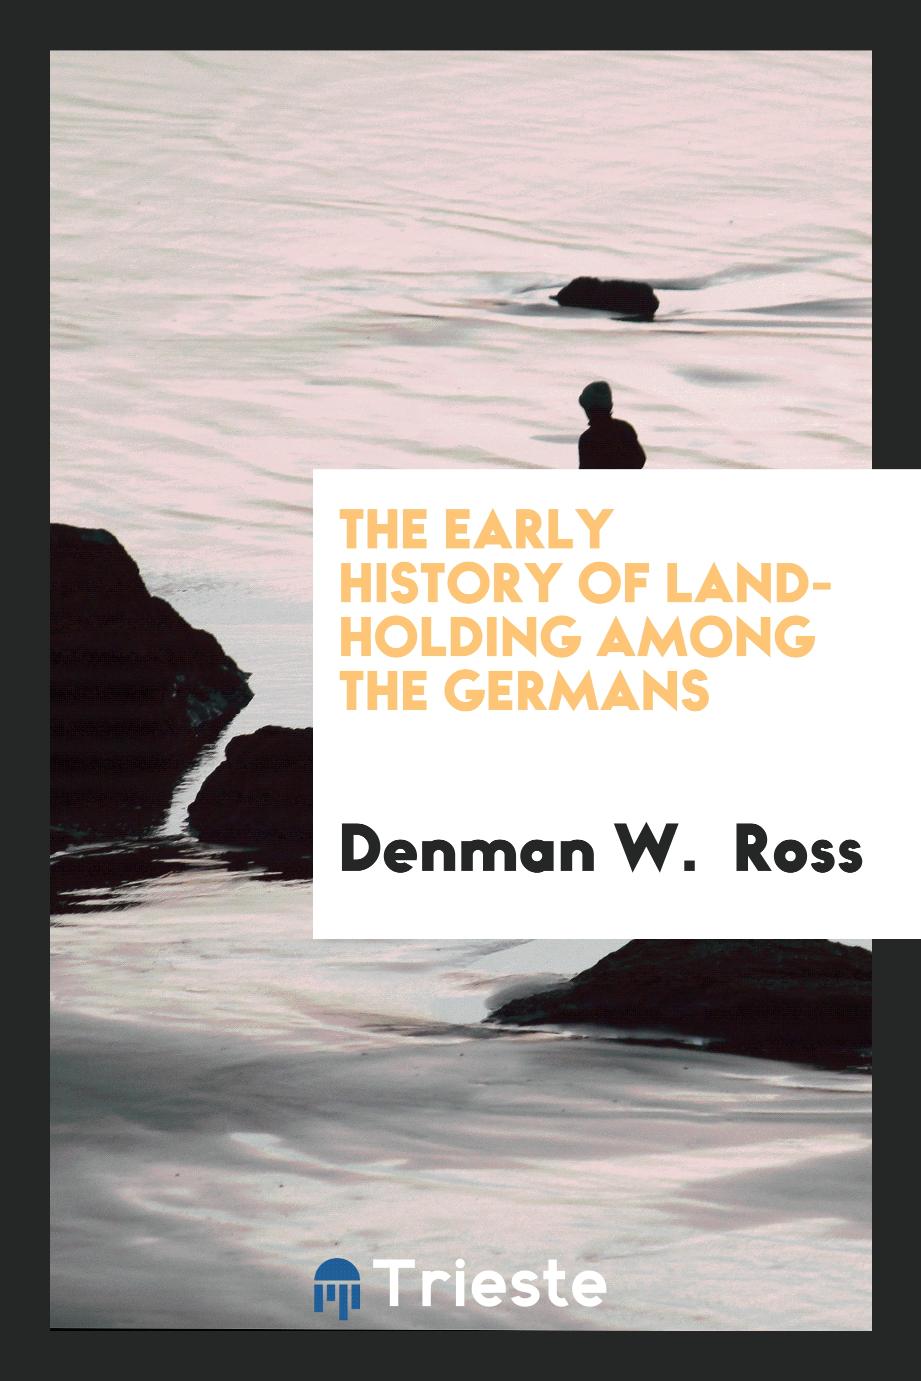 Denman W. Ross - The Early History of Land-Holding among the Germans